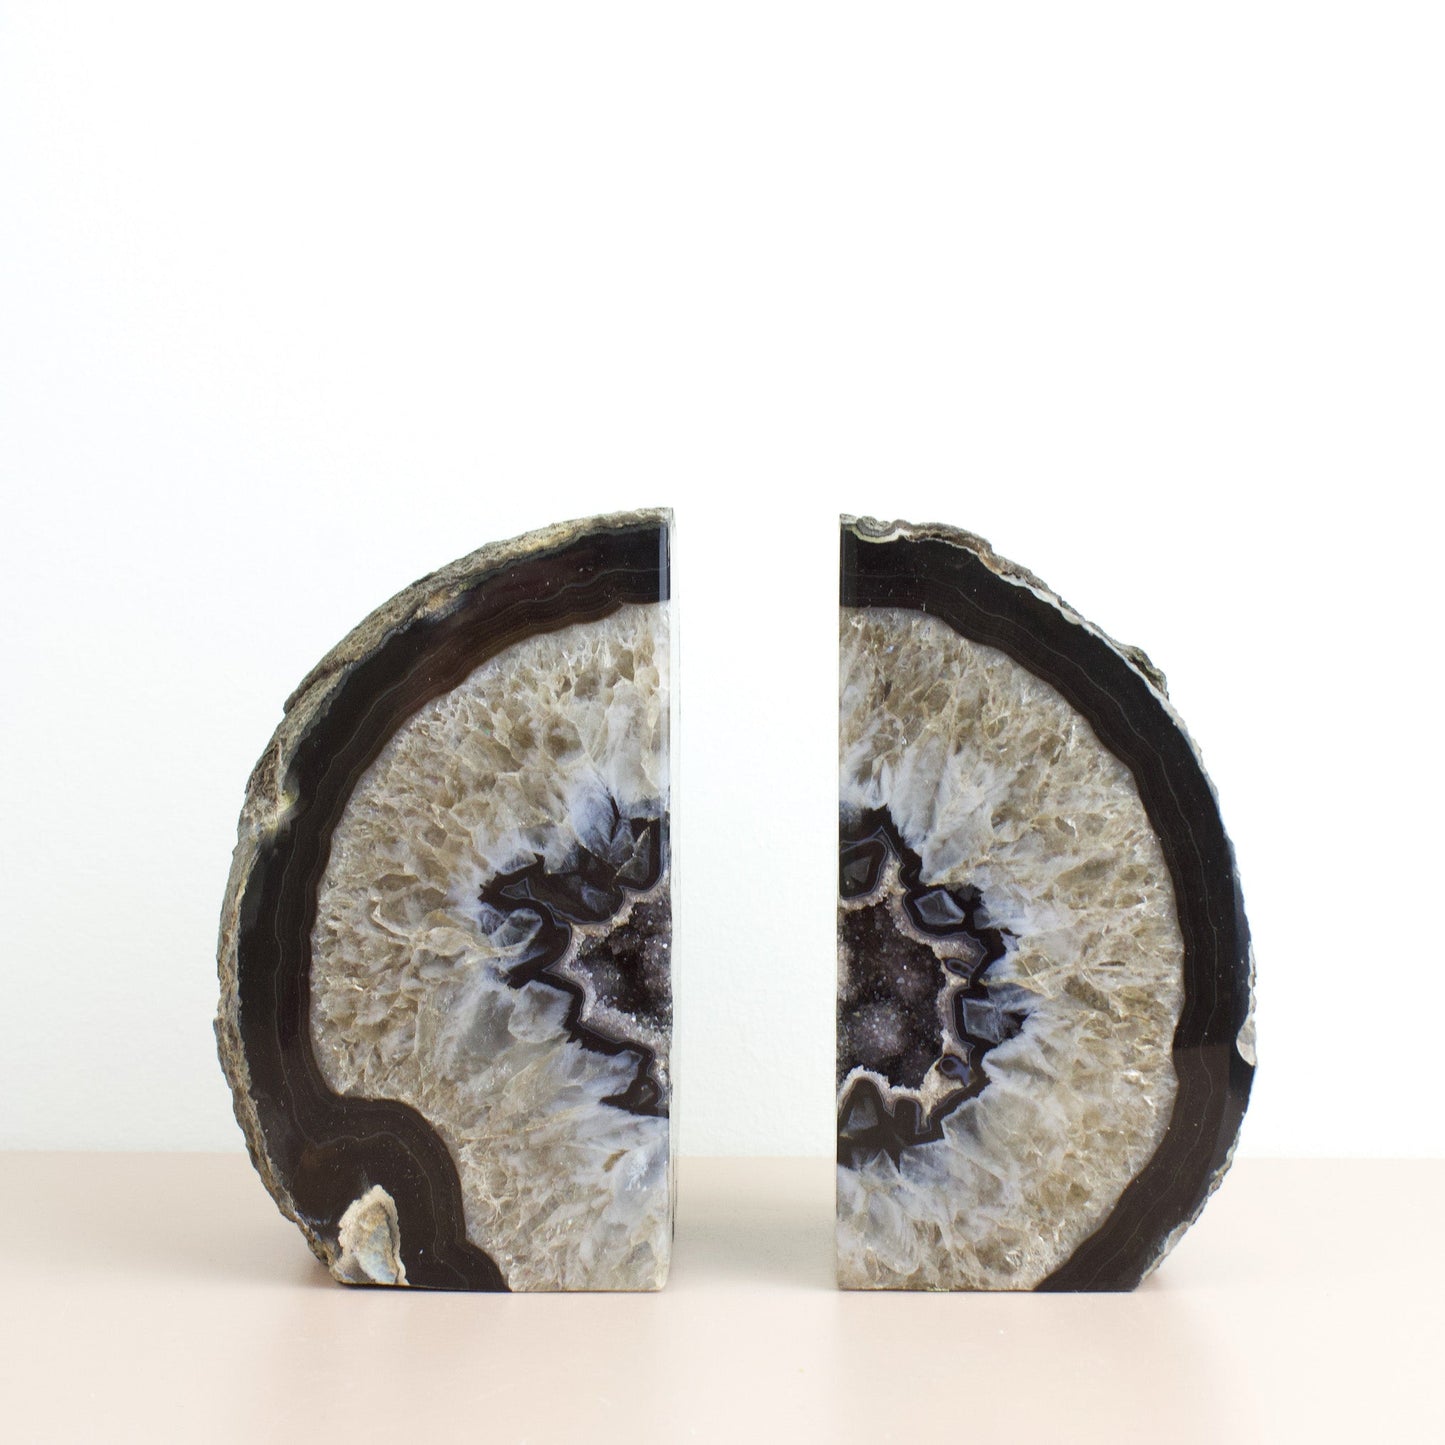 Black Agate Crystal Bookends #2 - Muse + Moonstone